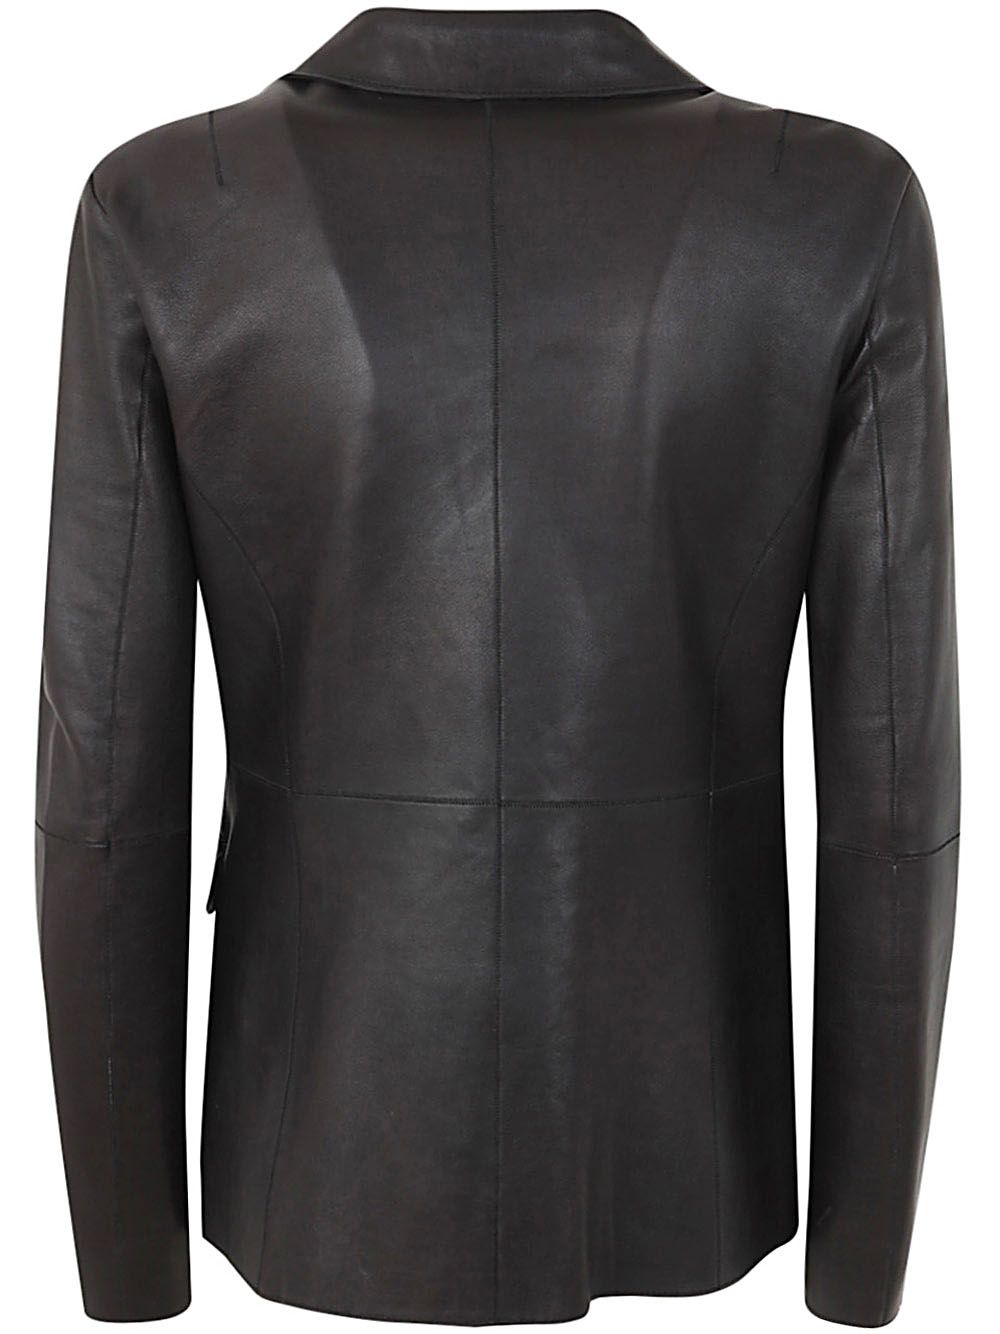 Shop The Jackie Leathers Lucy Blazer In Black